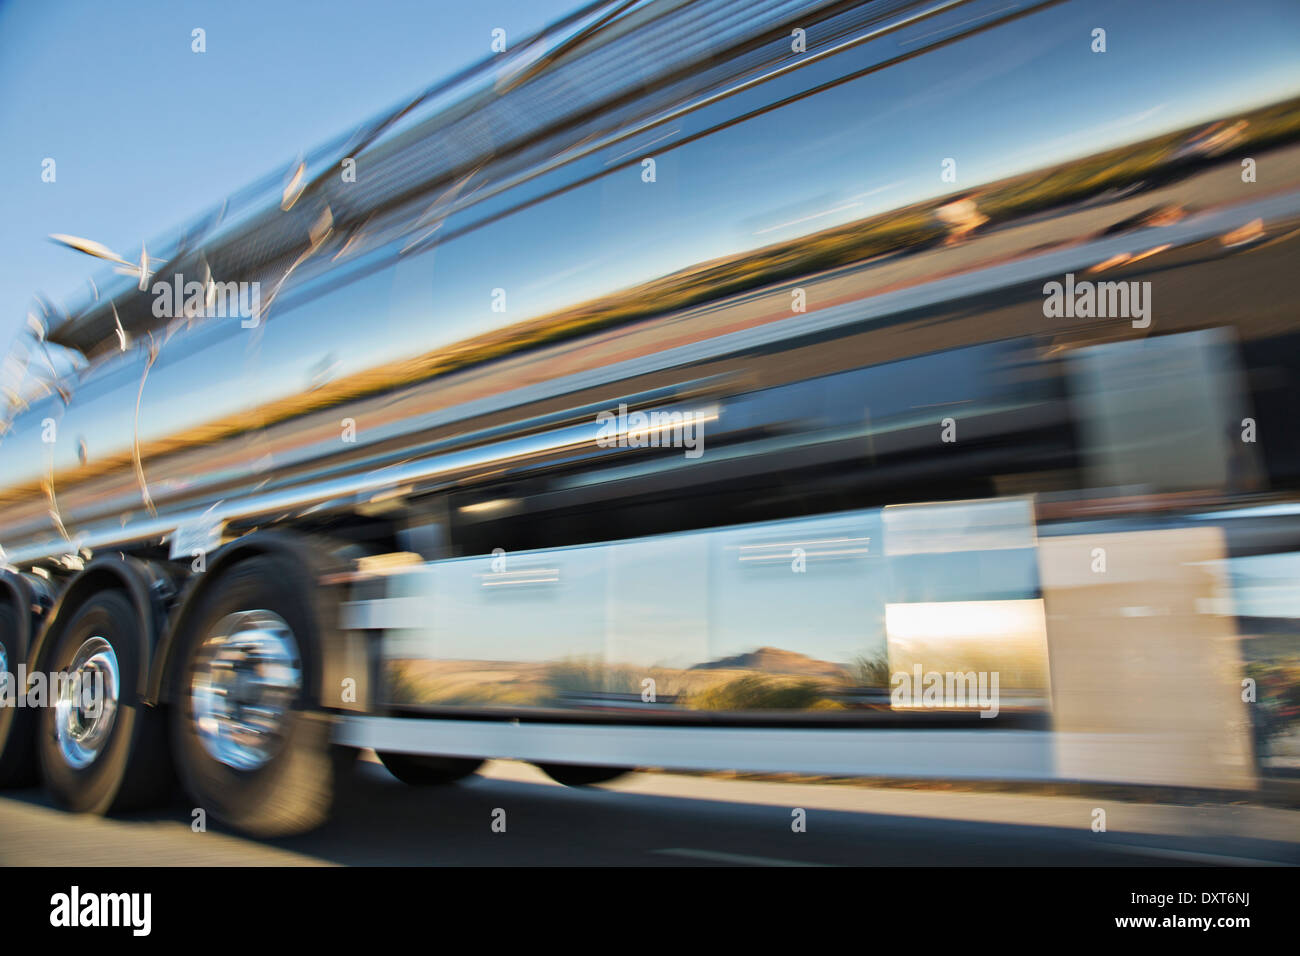 Blurred view of stainless steel milk tanker on the move Stock Photo